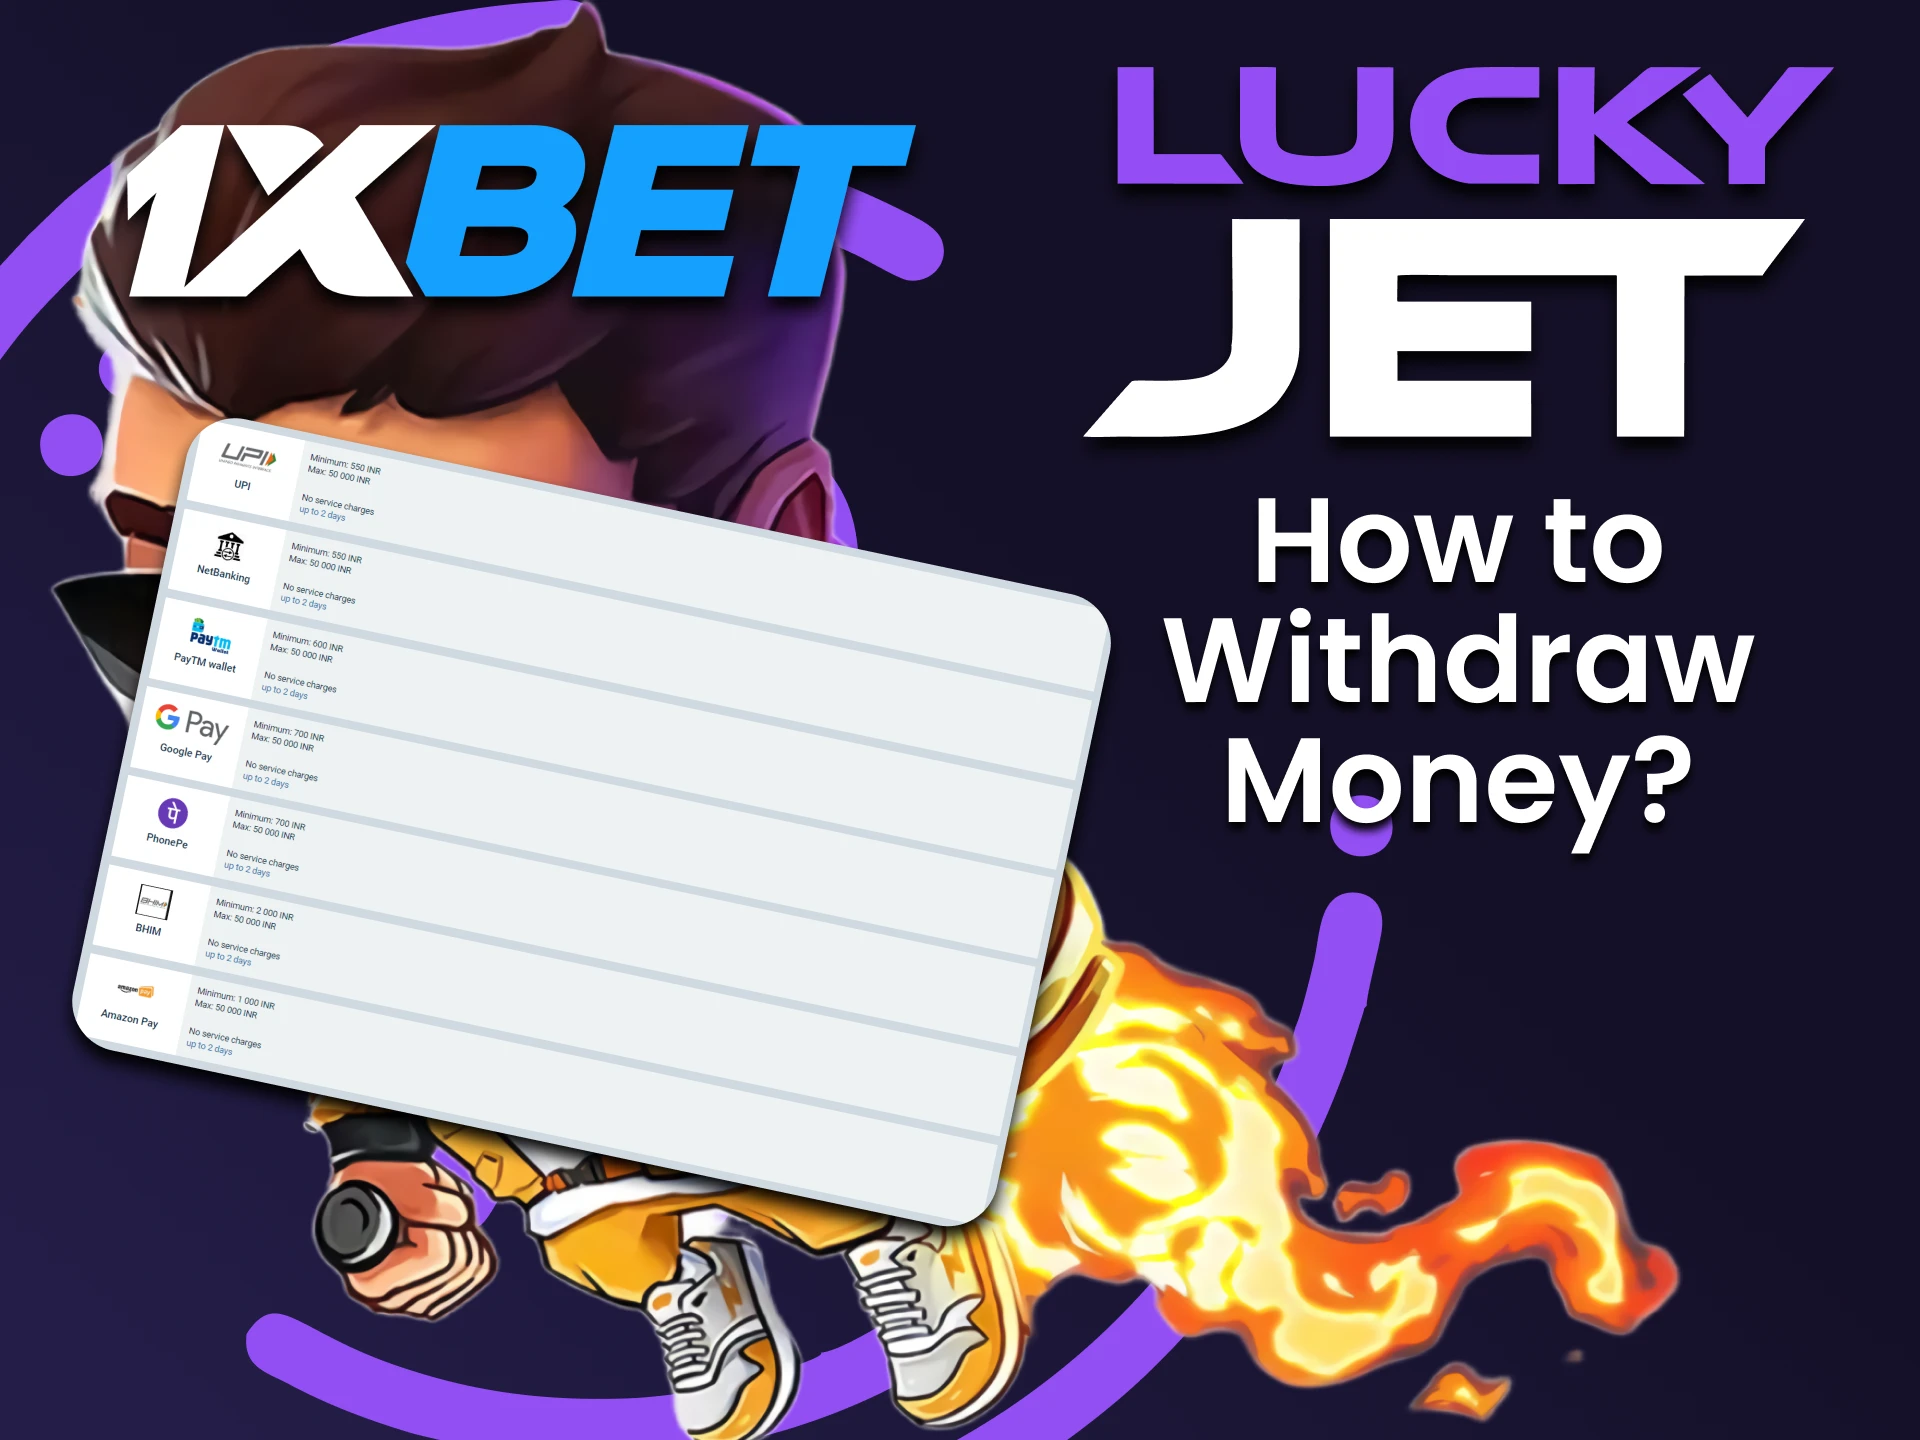 Find out how to withdraw funds for Lucky Jet on 1xbet.